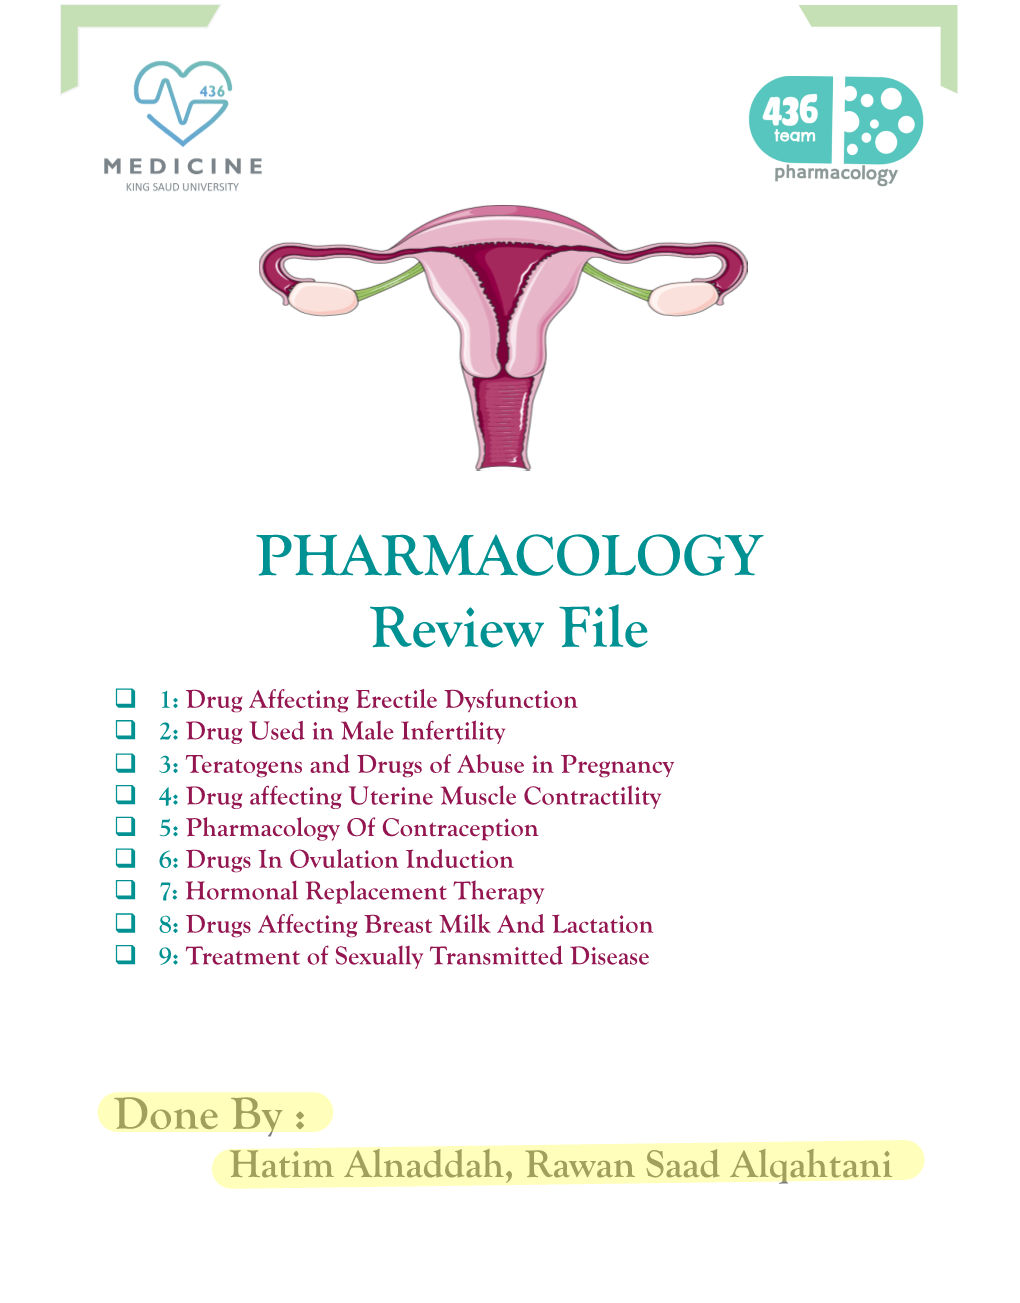 PHARMACOLOGY Review File